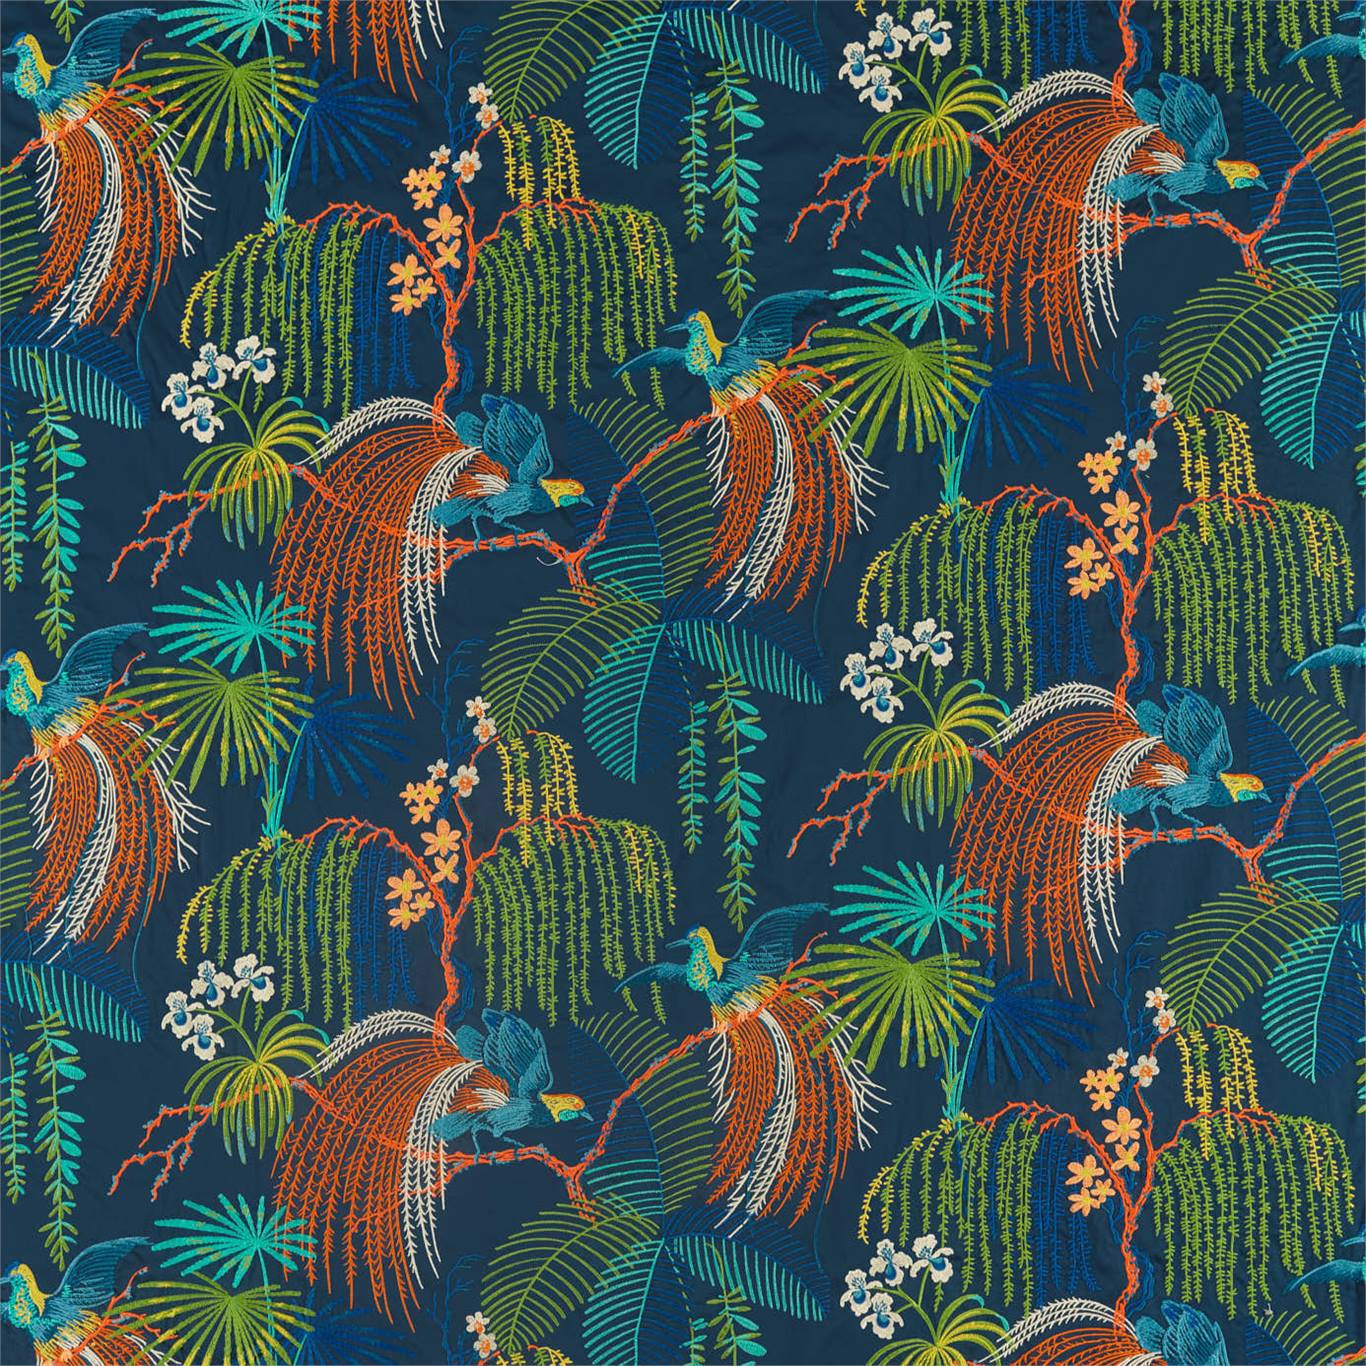 Rain Forest Embroidery Fabric by Sanderson